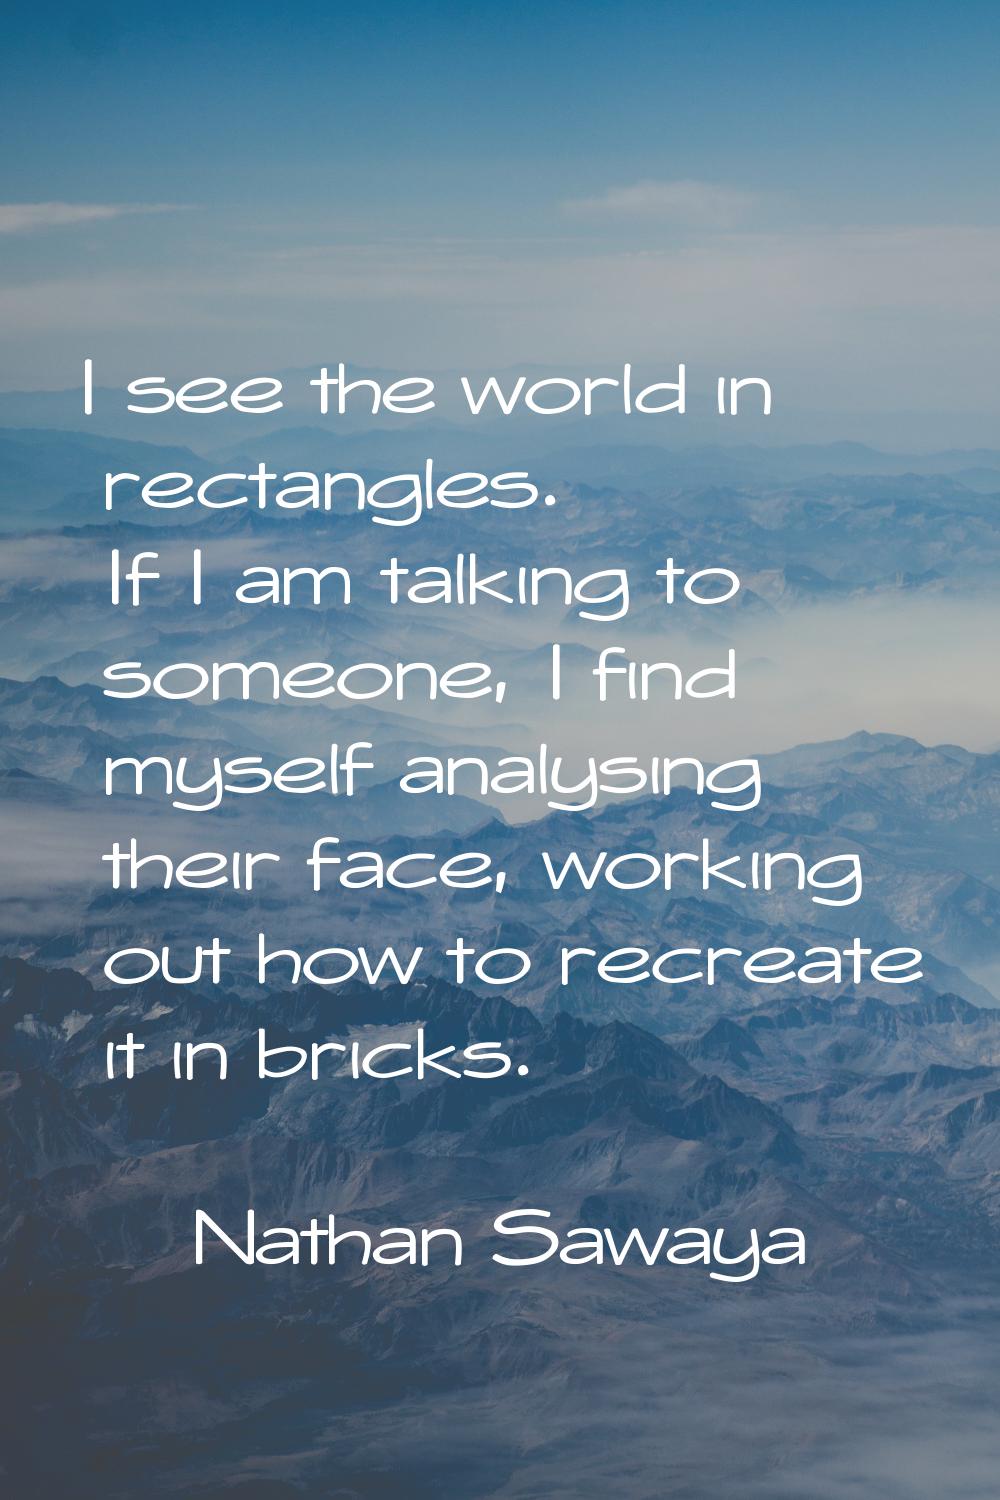 I see the world in rectangles. If I am talking to someone, I find myself analysing their face, work